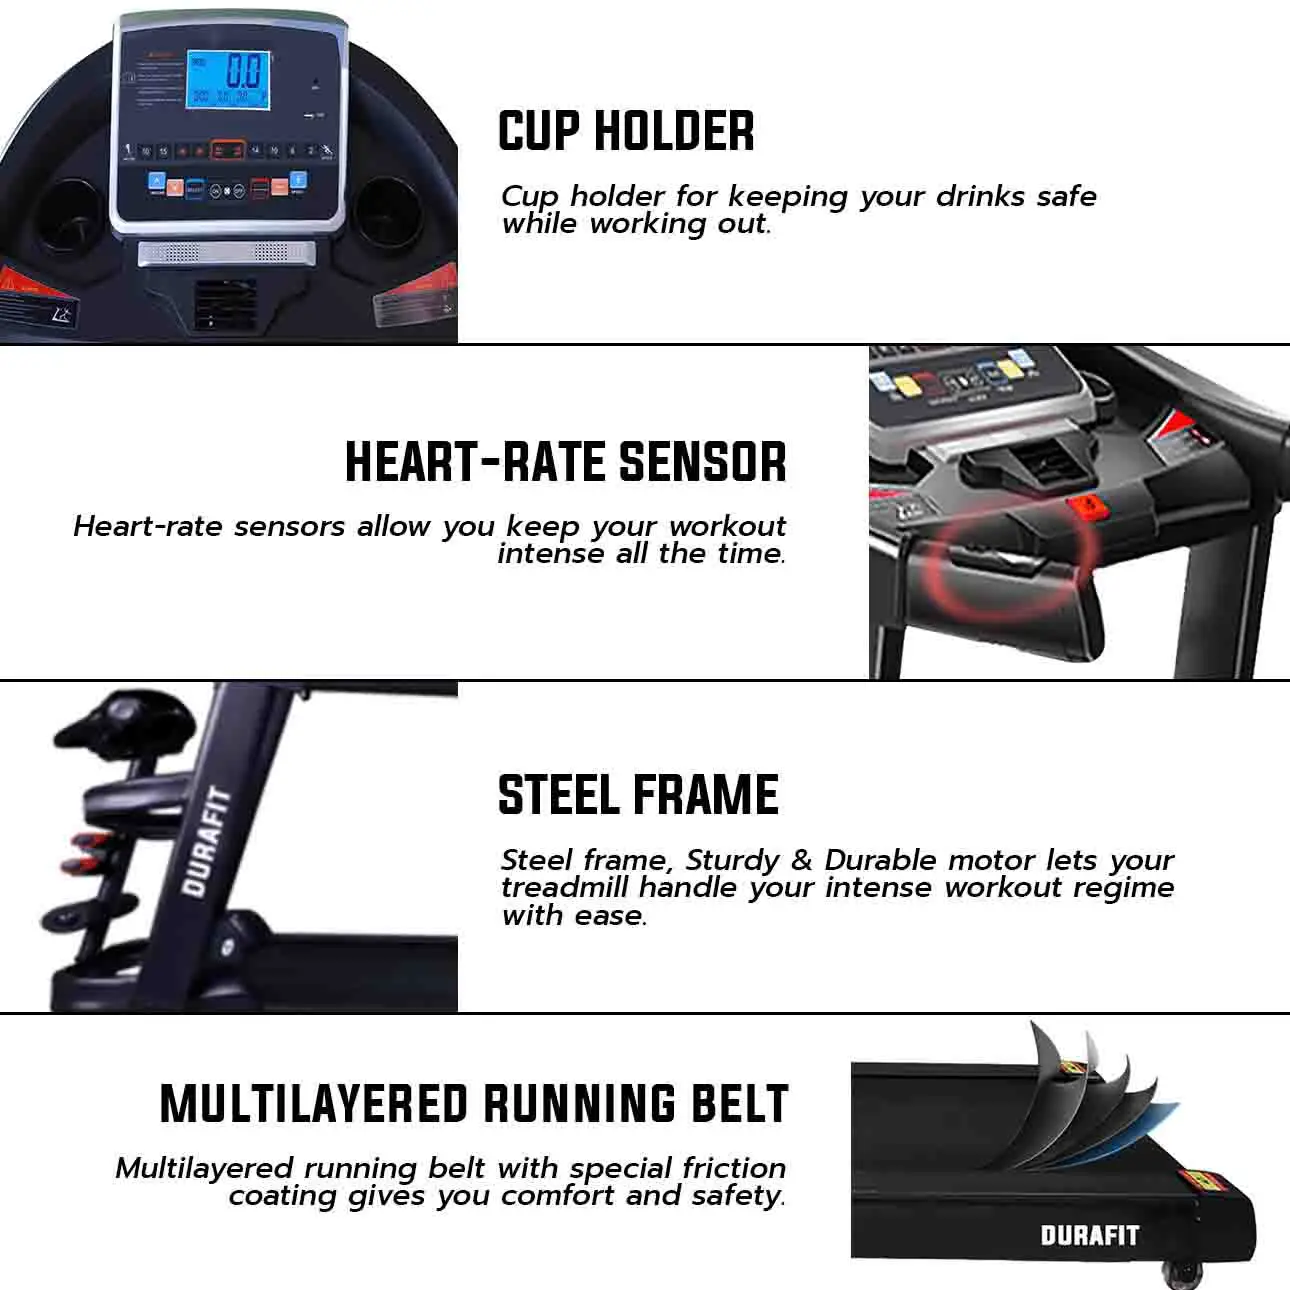 Durafit Panther Multifunction Treadmill with Heart Rate Sensor